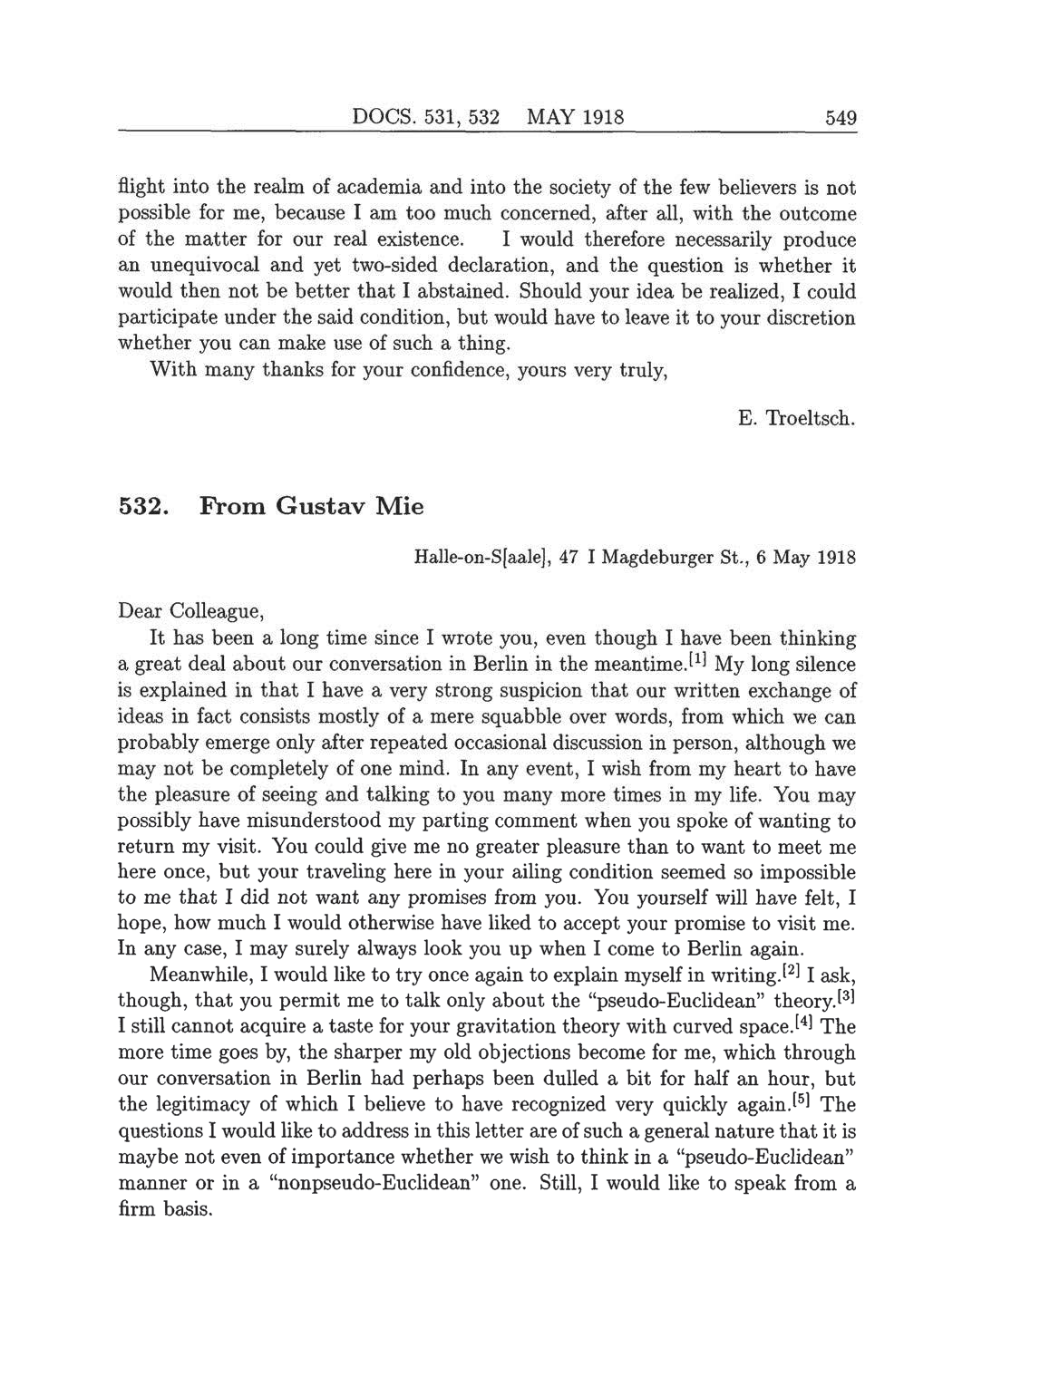 Volume 8: The Berlin Years: Correspondence, 1914-1918 (English translation supplement) page 549